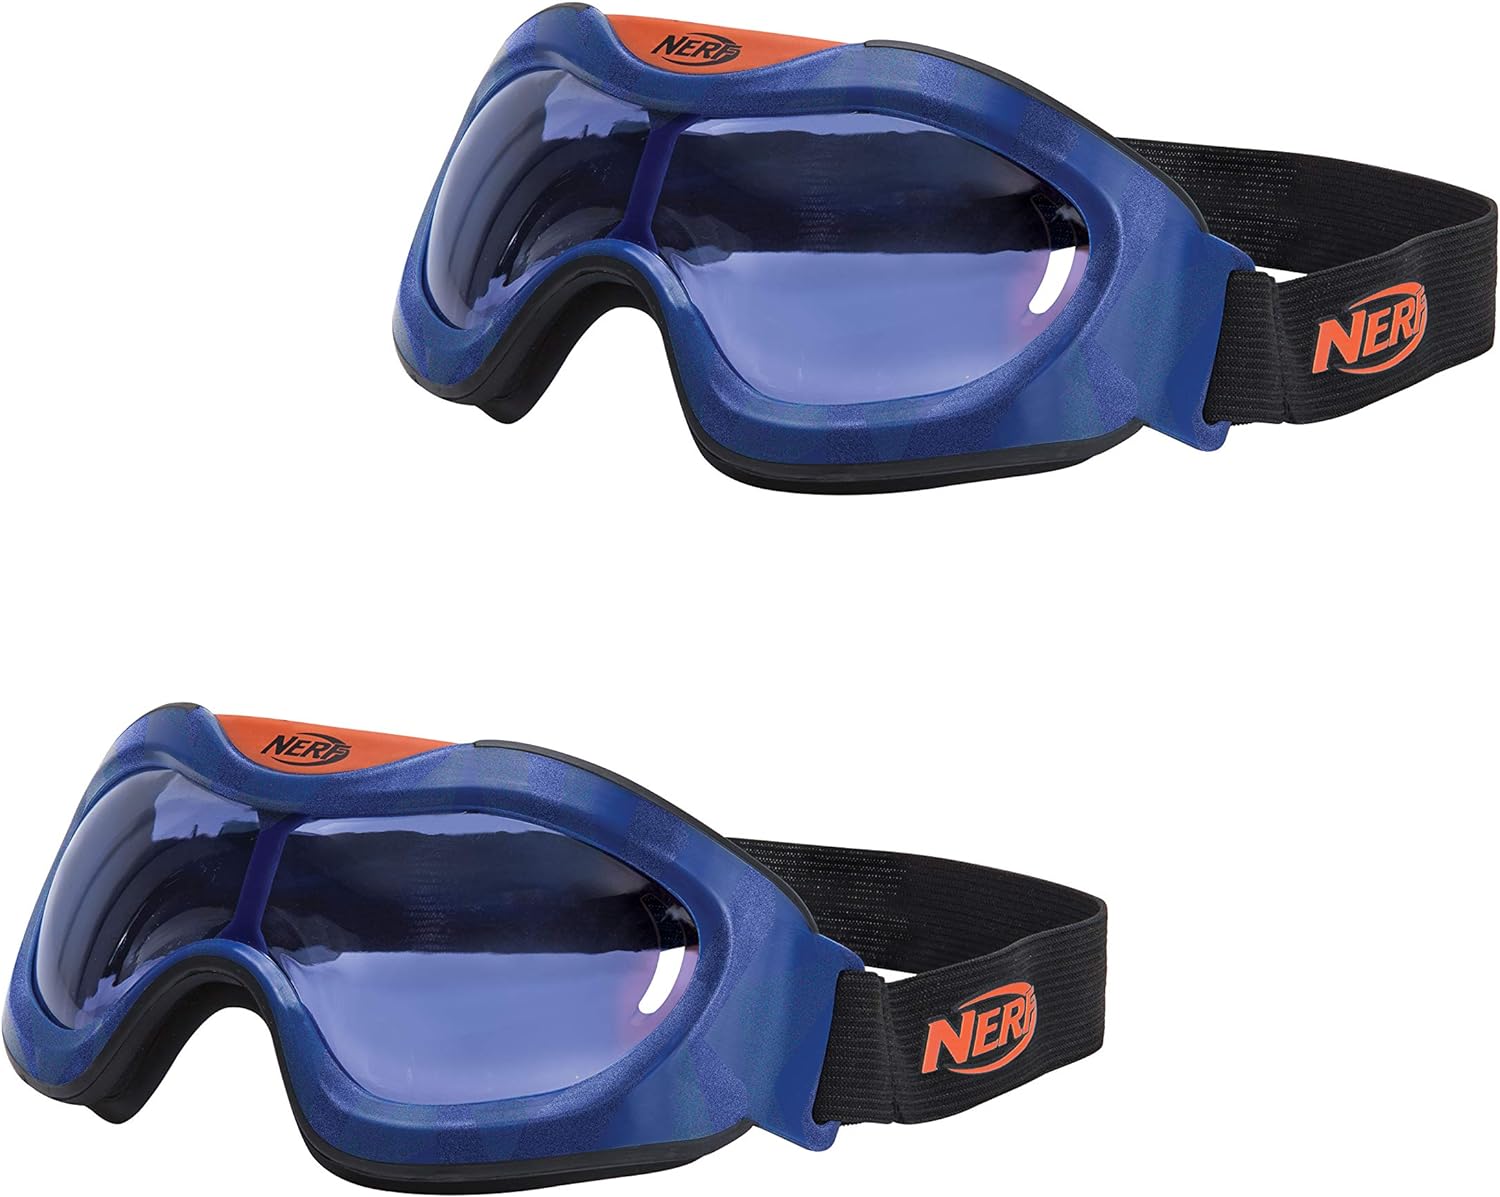 NERF Elite Goggles, Transparent/Clear Impact-Resistant Tactical Eyewear, for use Blaster - Stay Prepared & Protected for Battle - One Size Fits All